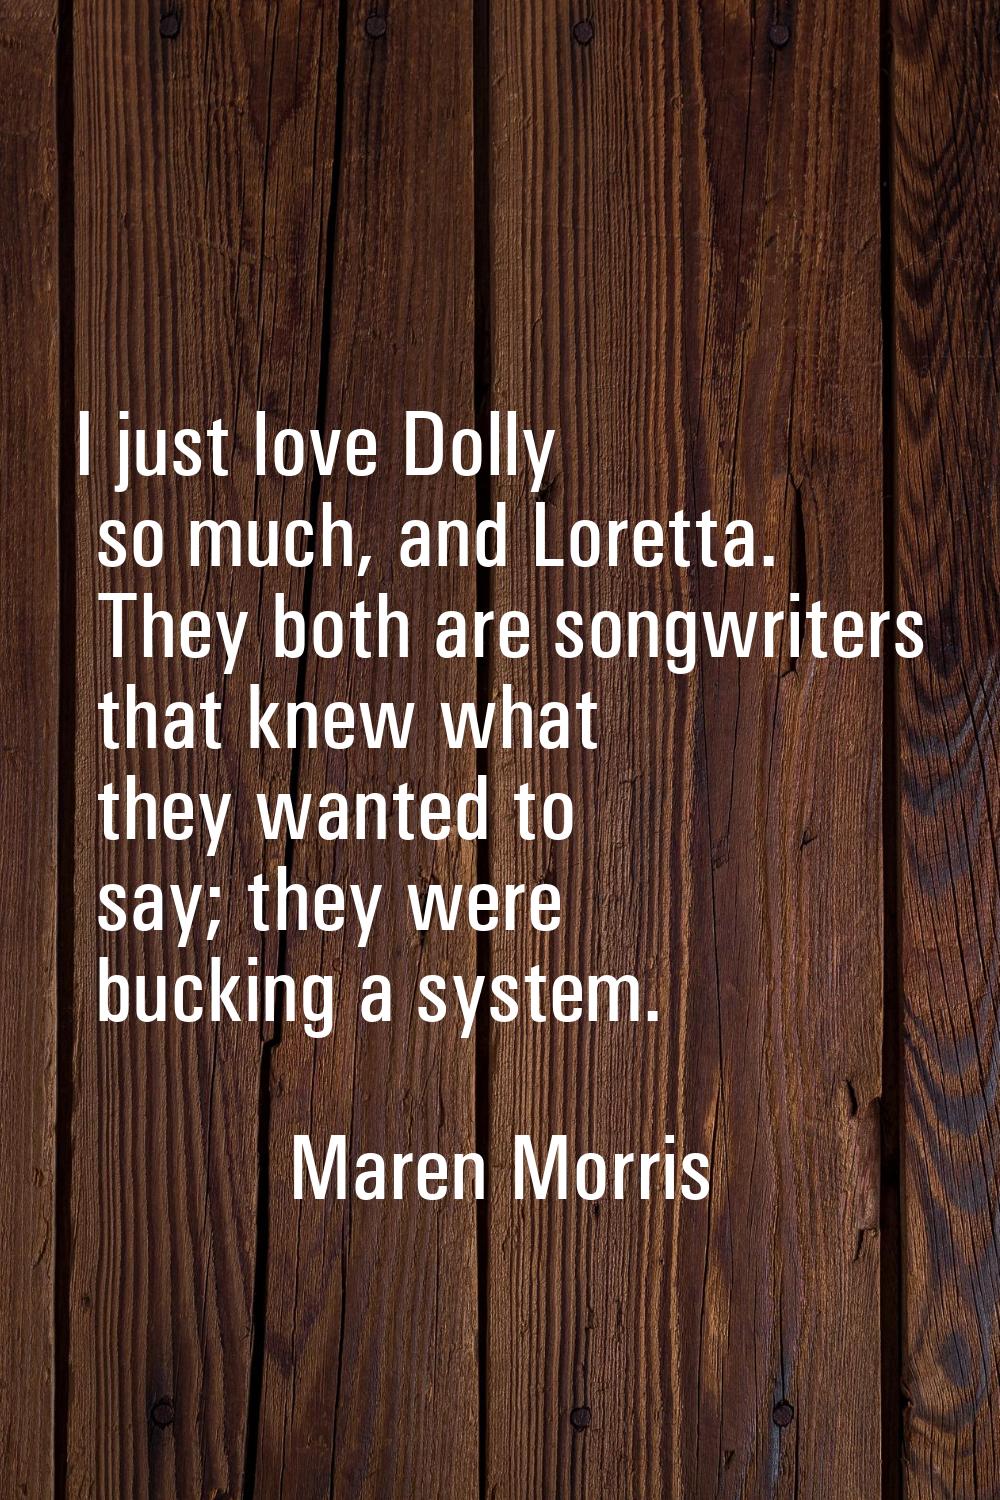 I just love Dolly so much, and Loretta. They both are songwriters that knew what they wanted to say